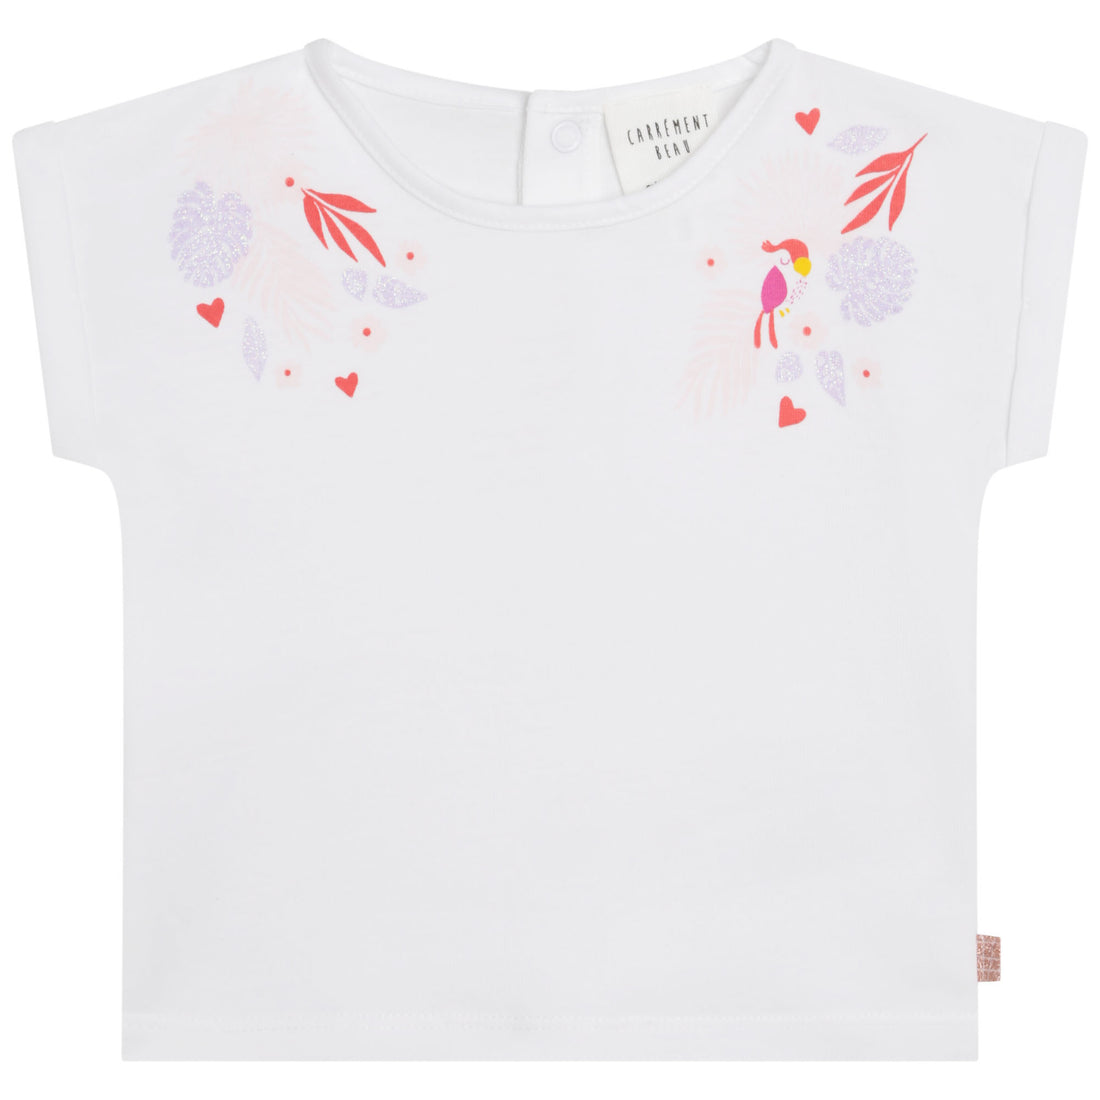 carrement-beau-short-sleeves-t-shirt-white-carr-ss23y05252-white-6m